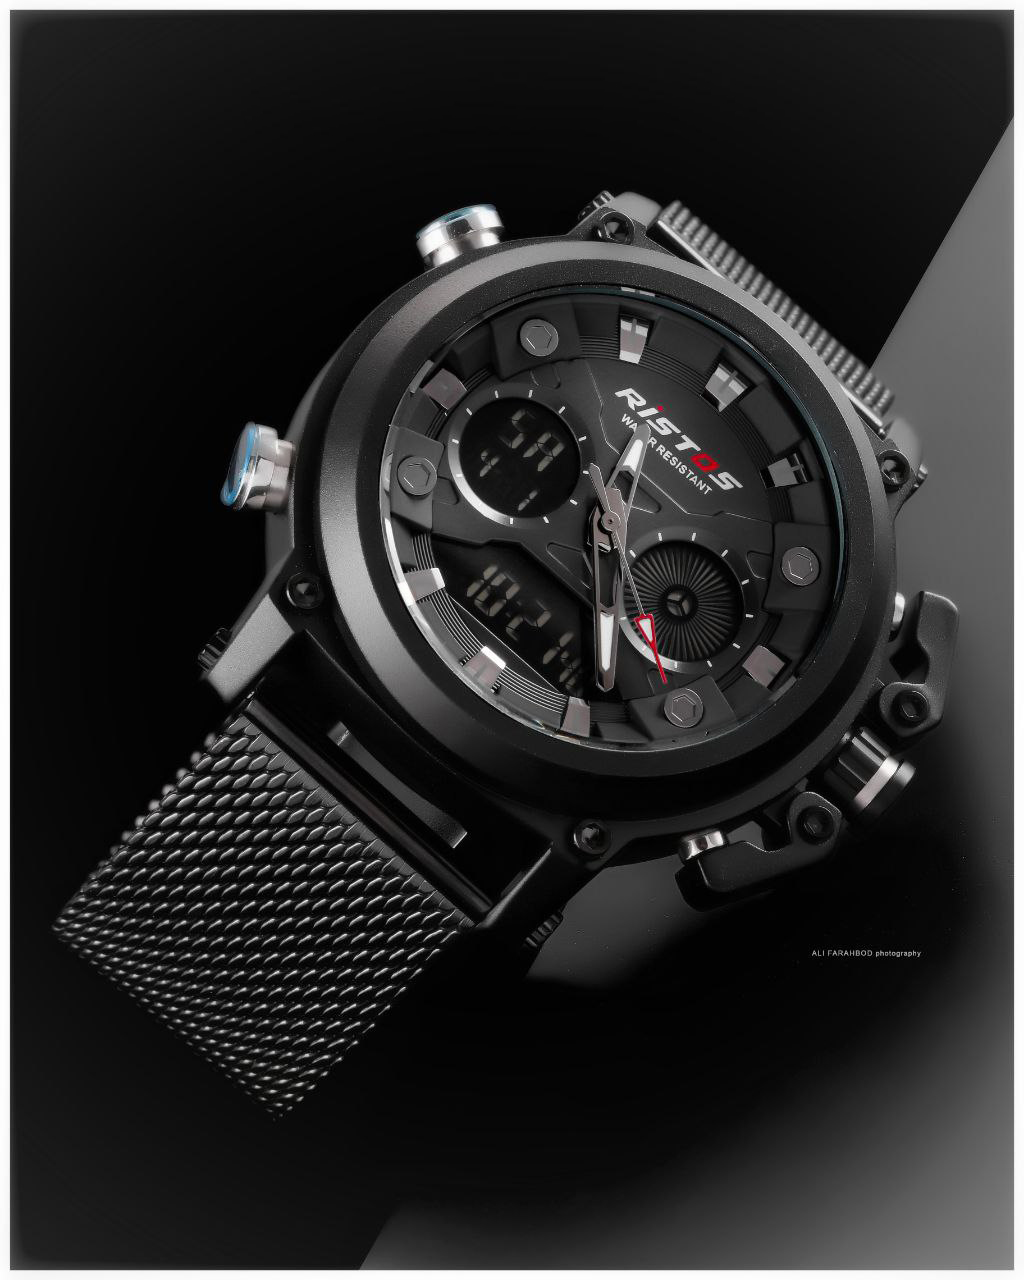 TEMEIS Square Multifunctional Mens Watch With High Hardness Minerals,  Tempered Glass, 6 Segment Display, Stopwatch, Timing, And Luminous Hands  Di244R From Hftfcn, $47.44 | DHgate.Com